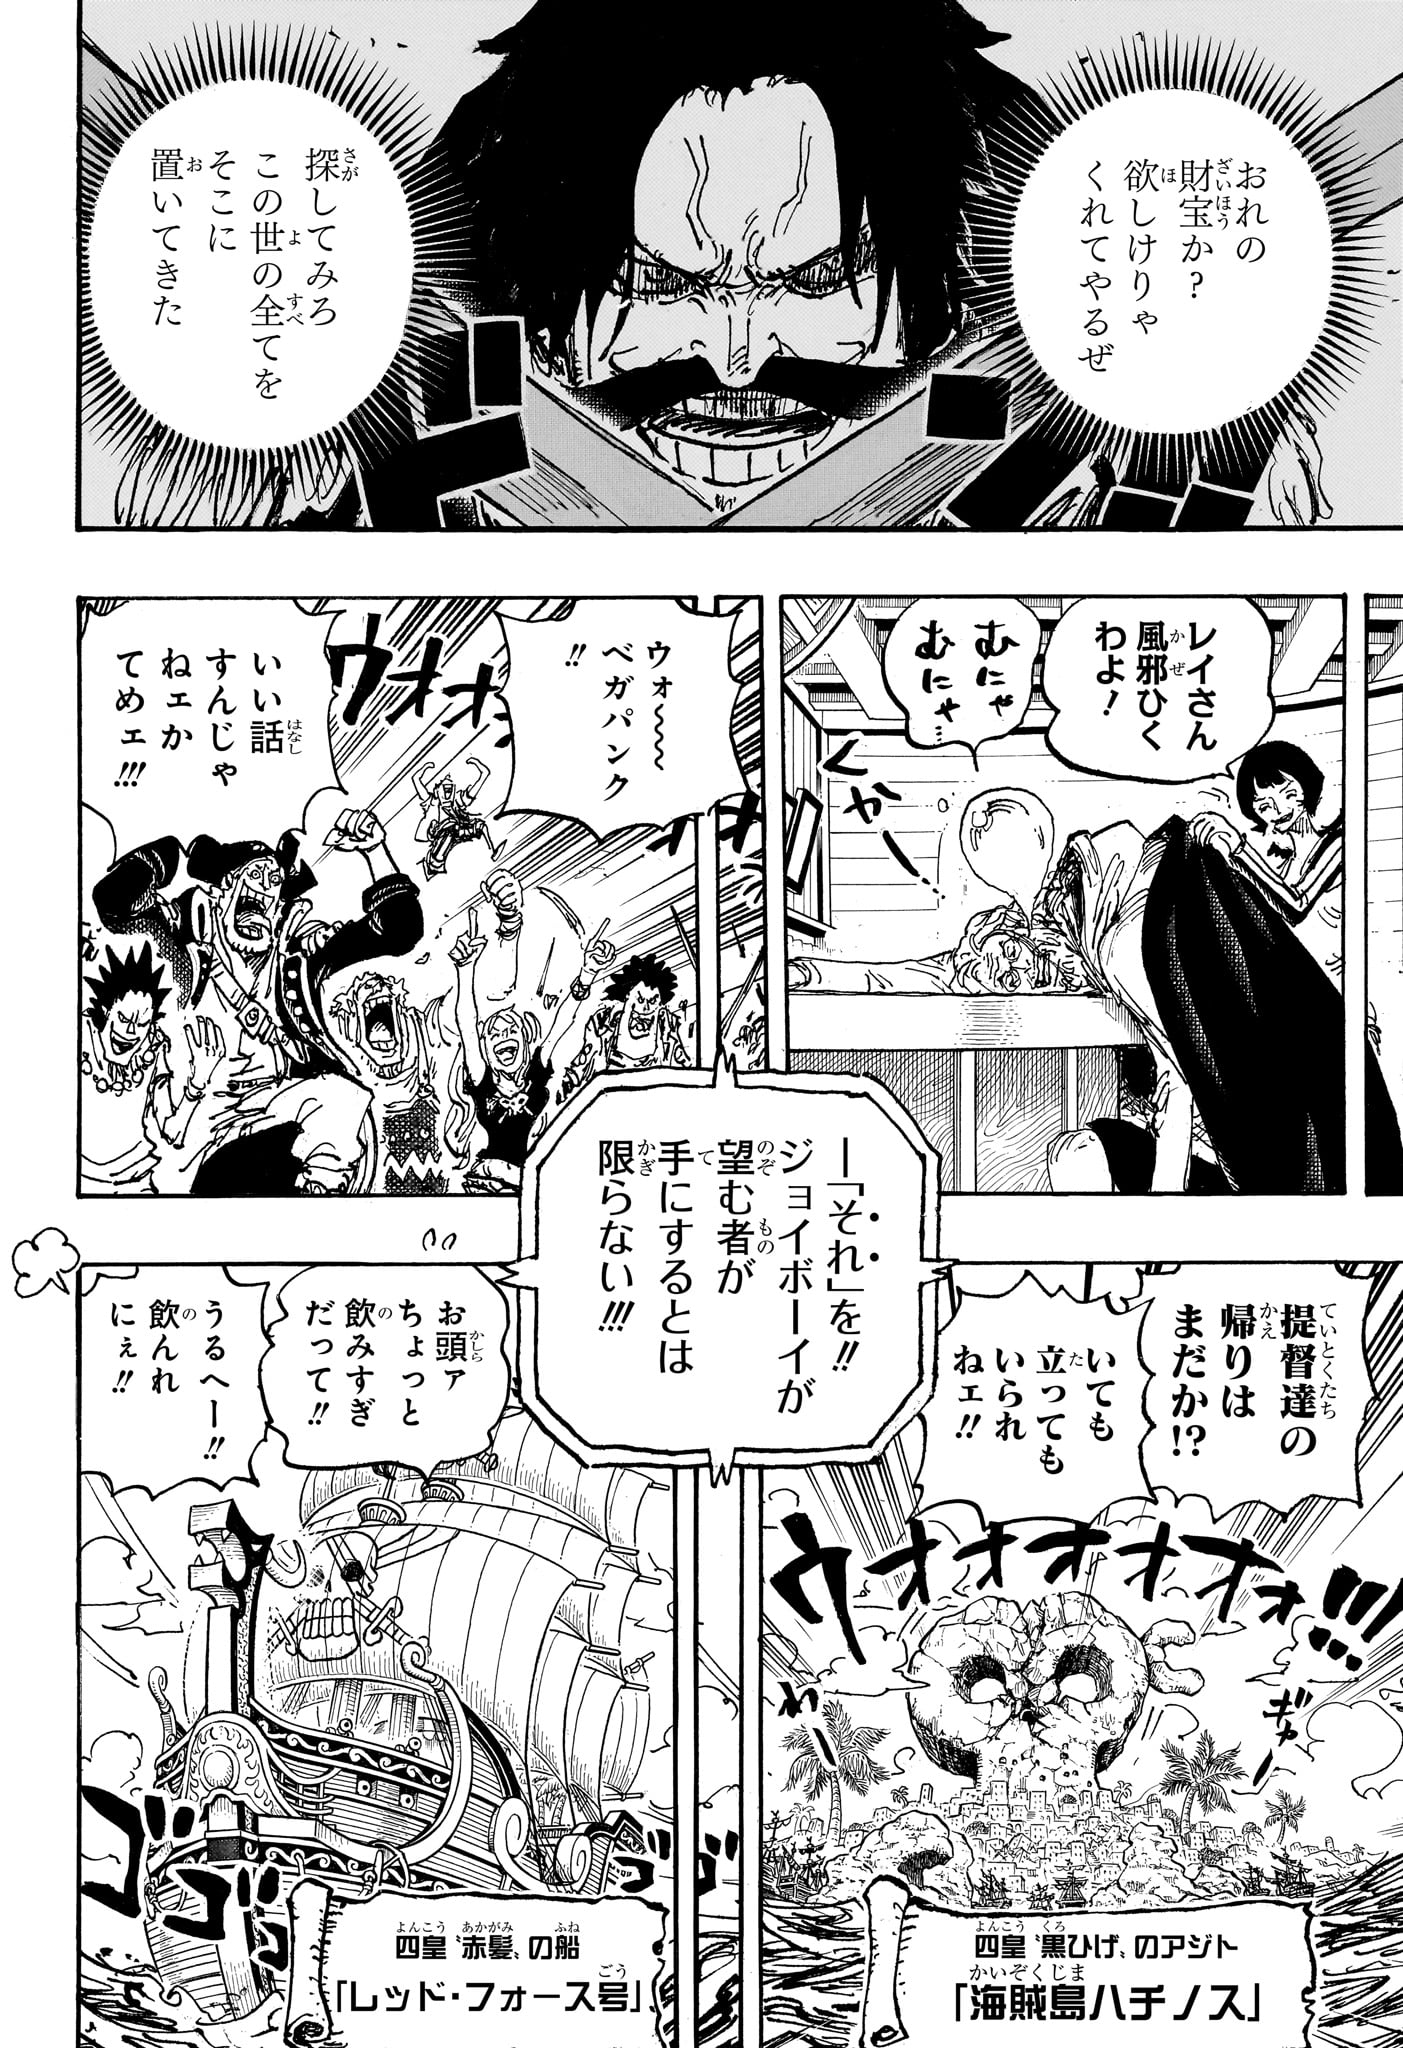 One Piece - Chapter 1121 - Page 15